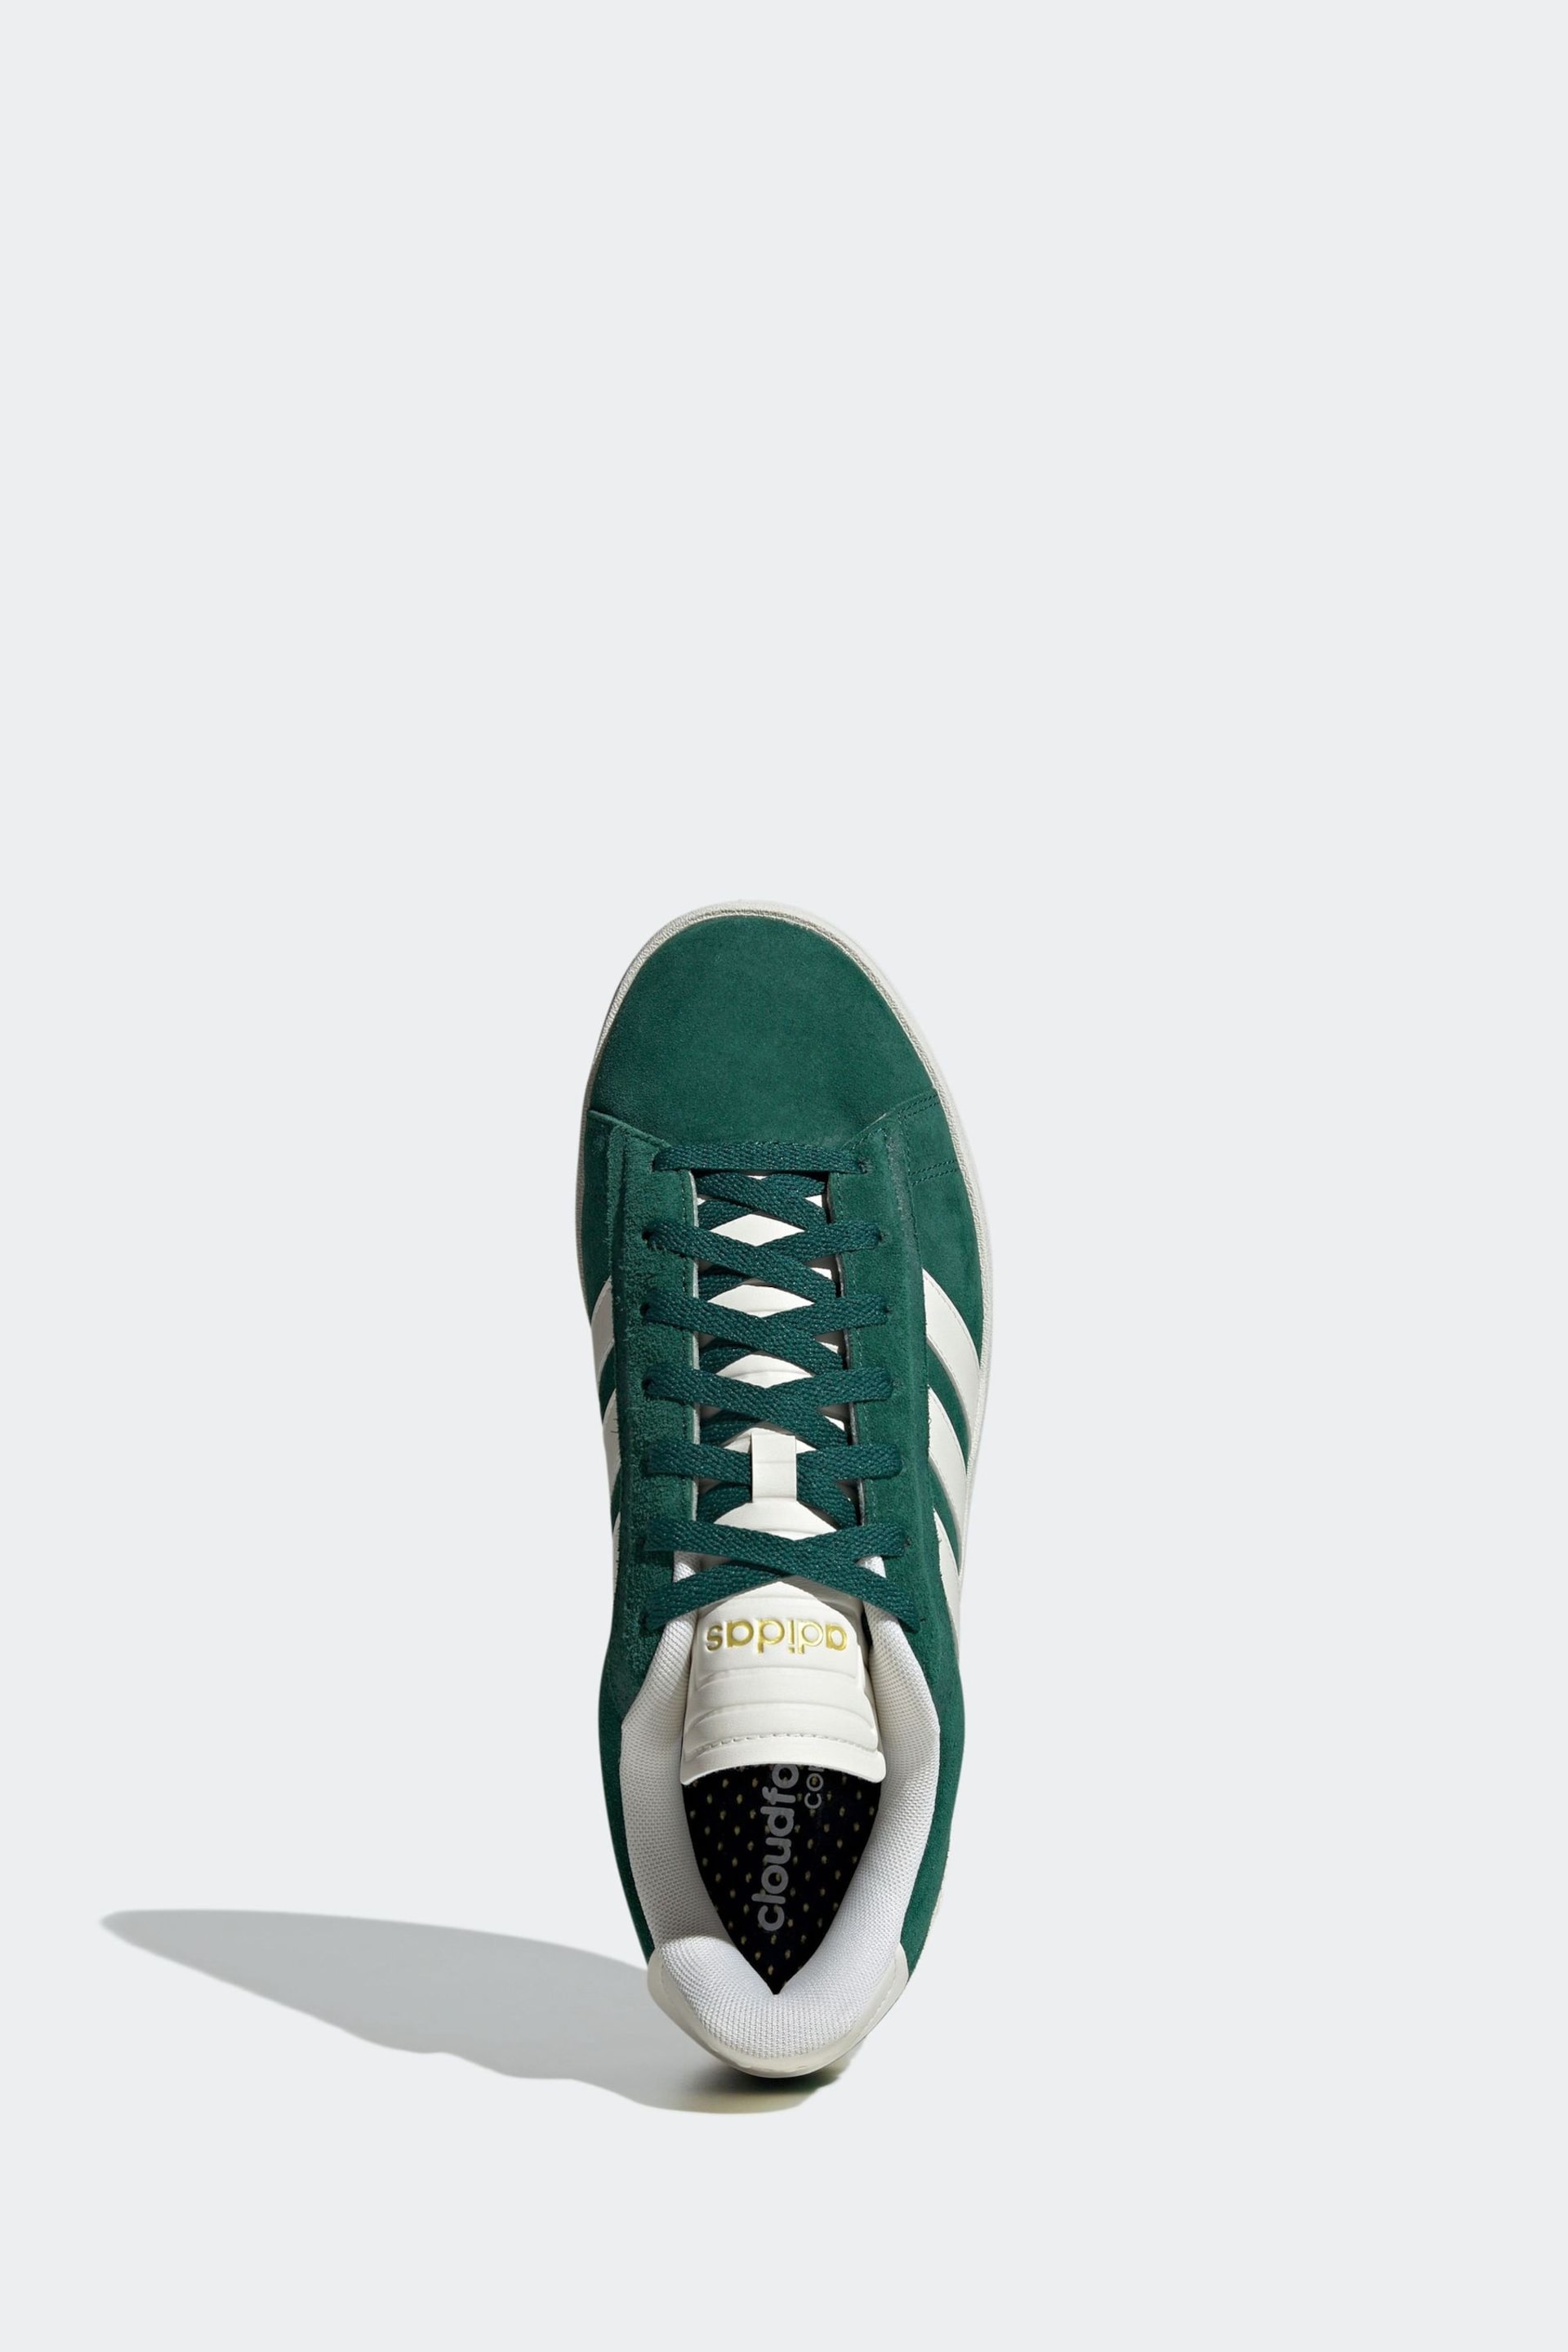 adidas Green/White Sportswear Grand Court Alpha Trainers - Image 5 of 6